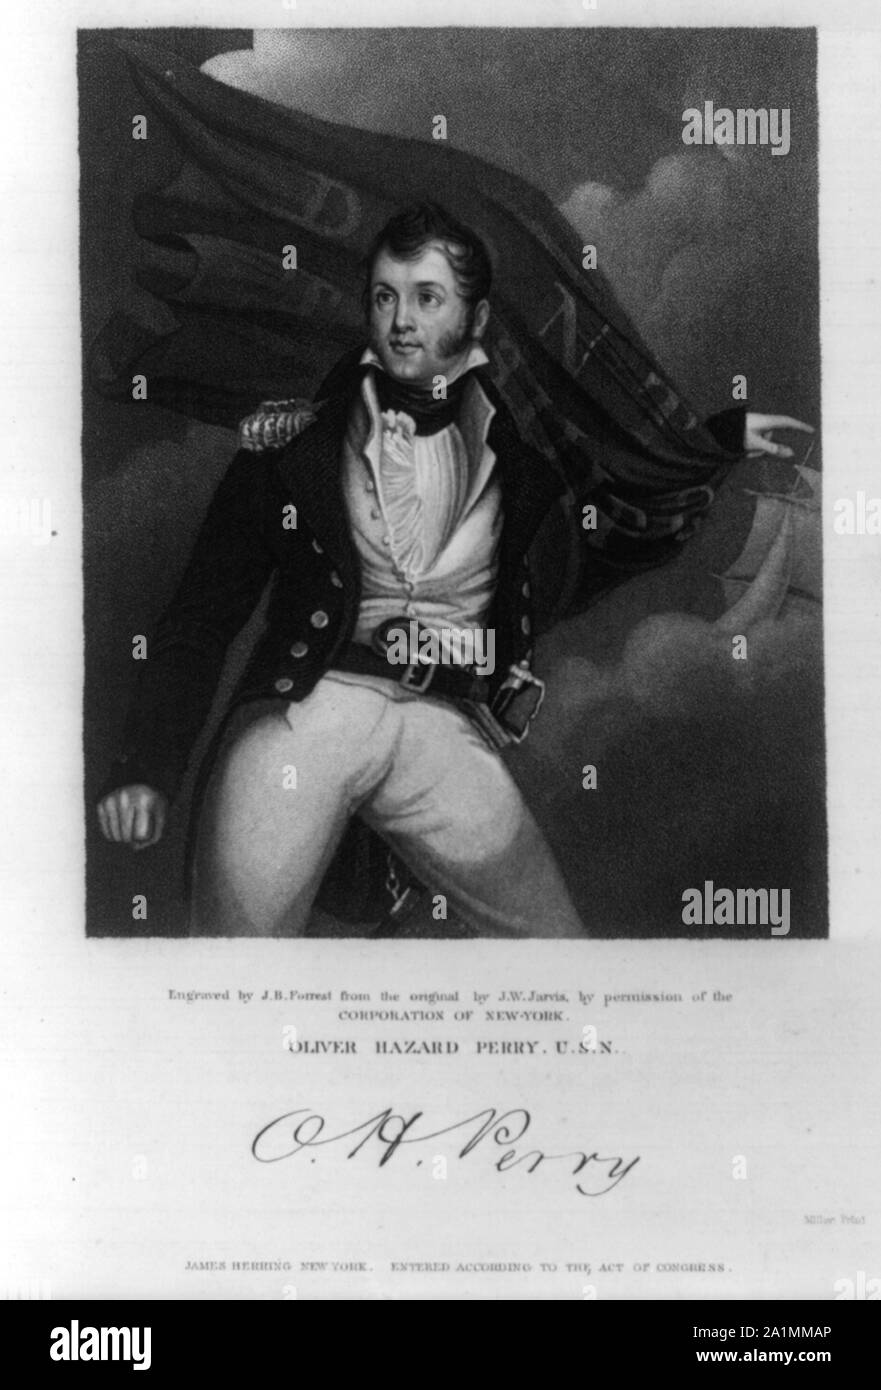 Oliver Hazard Perry U.S.N. / engraved by J.B. Forrest from the original by J.W. Jarvis by the permission of the Corporation of New York ; Miller print. Stock Photo